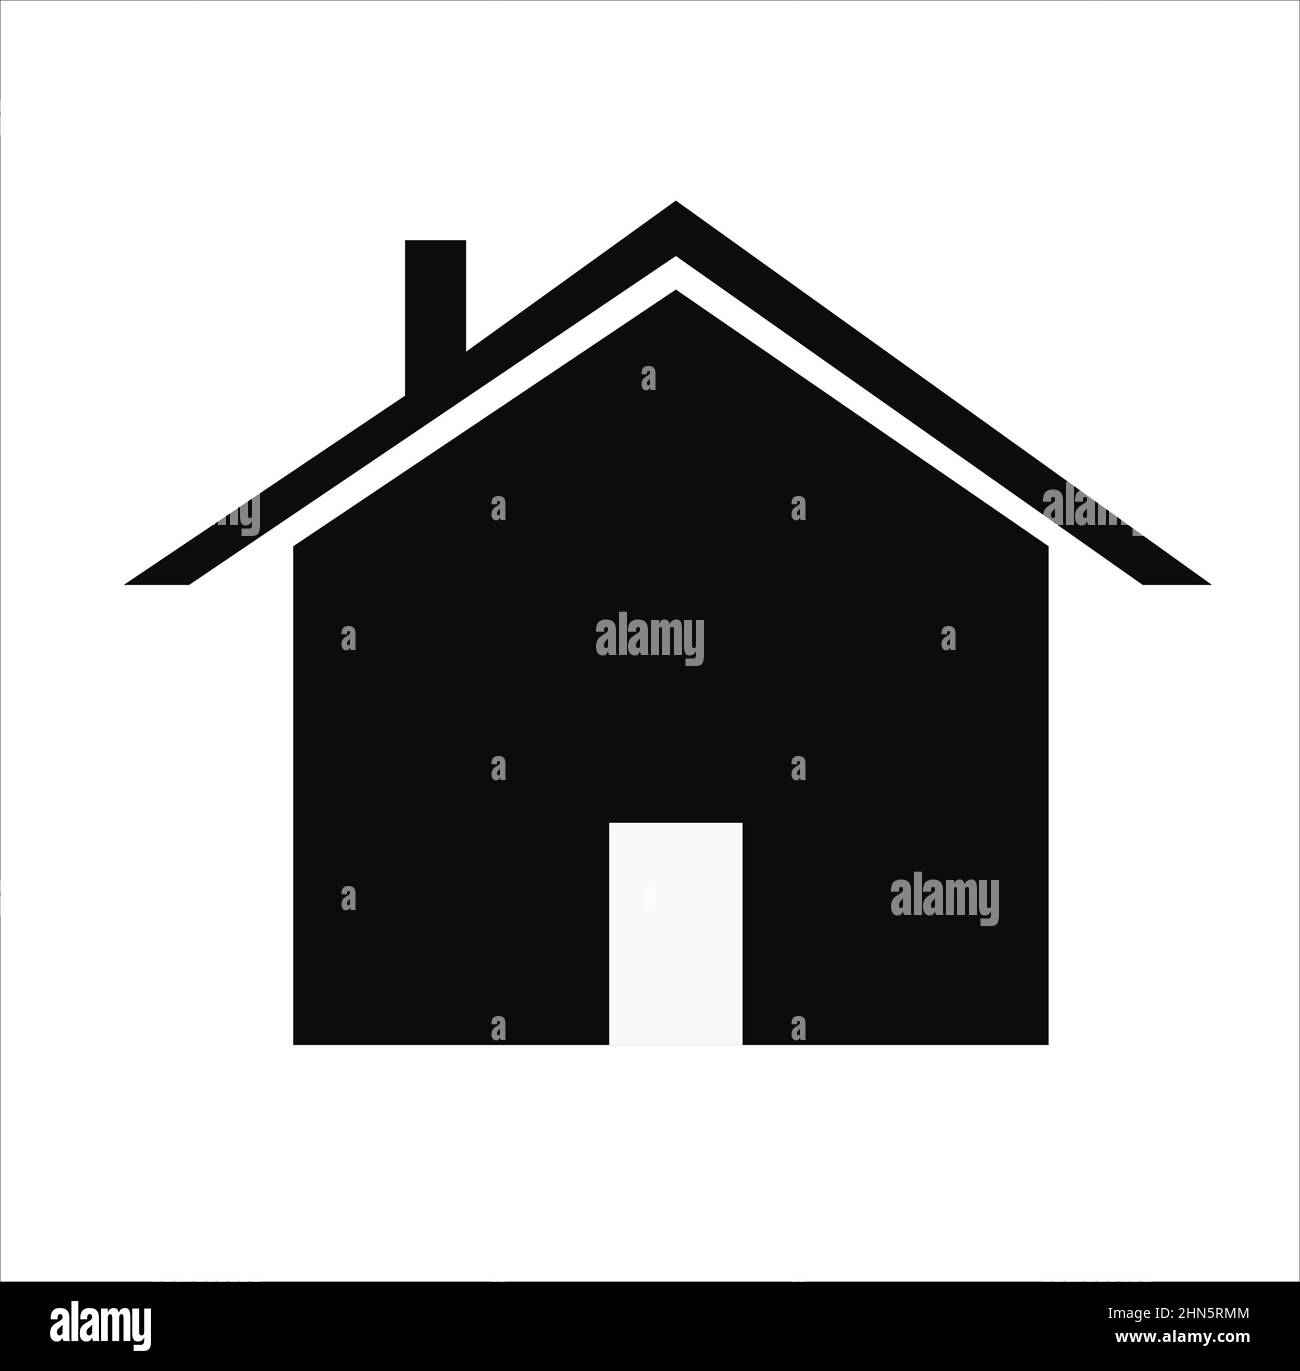 Building, House, Home vector image, home png image, stay home stay safe image, home logo, home icon, hd home image, home design image, house image gal Stock Vector